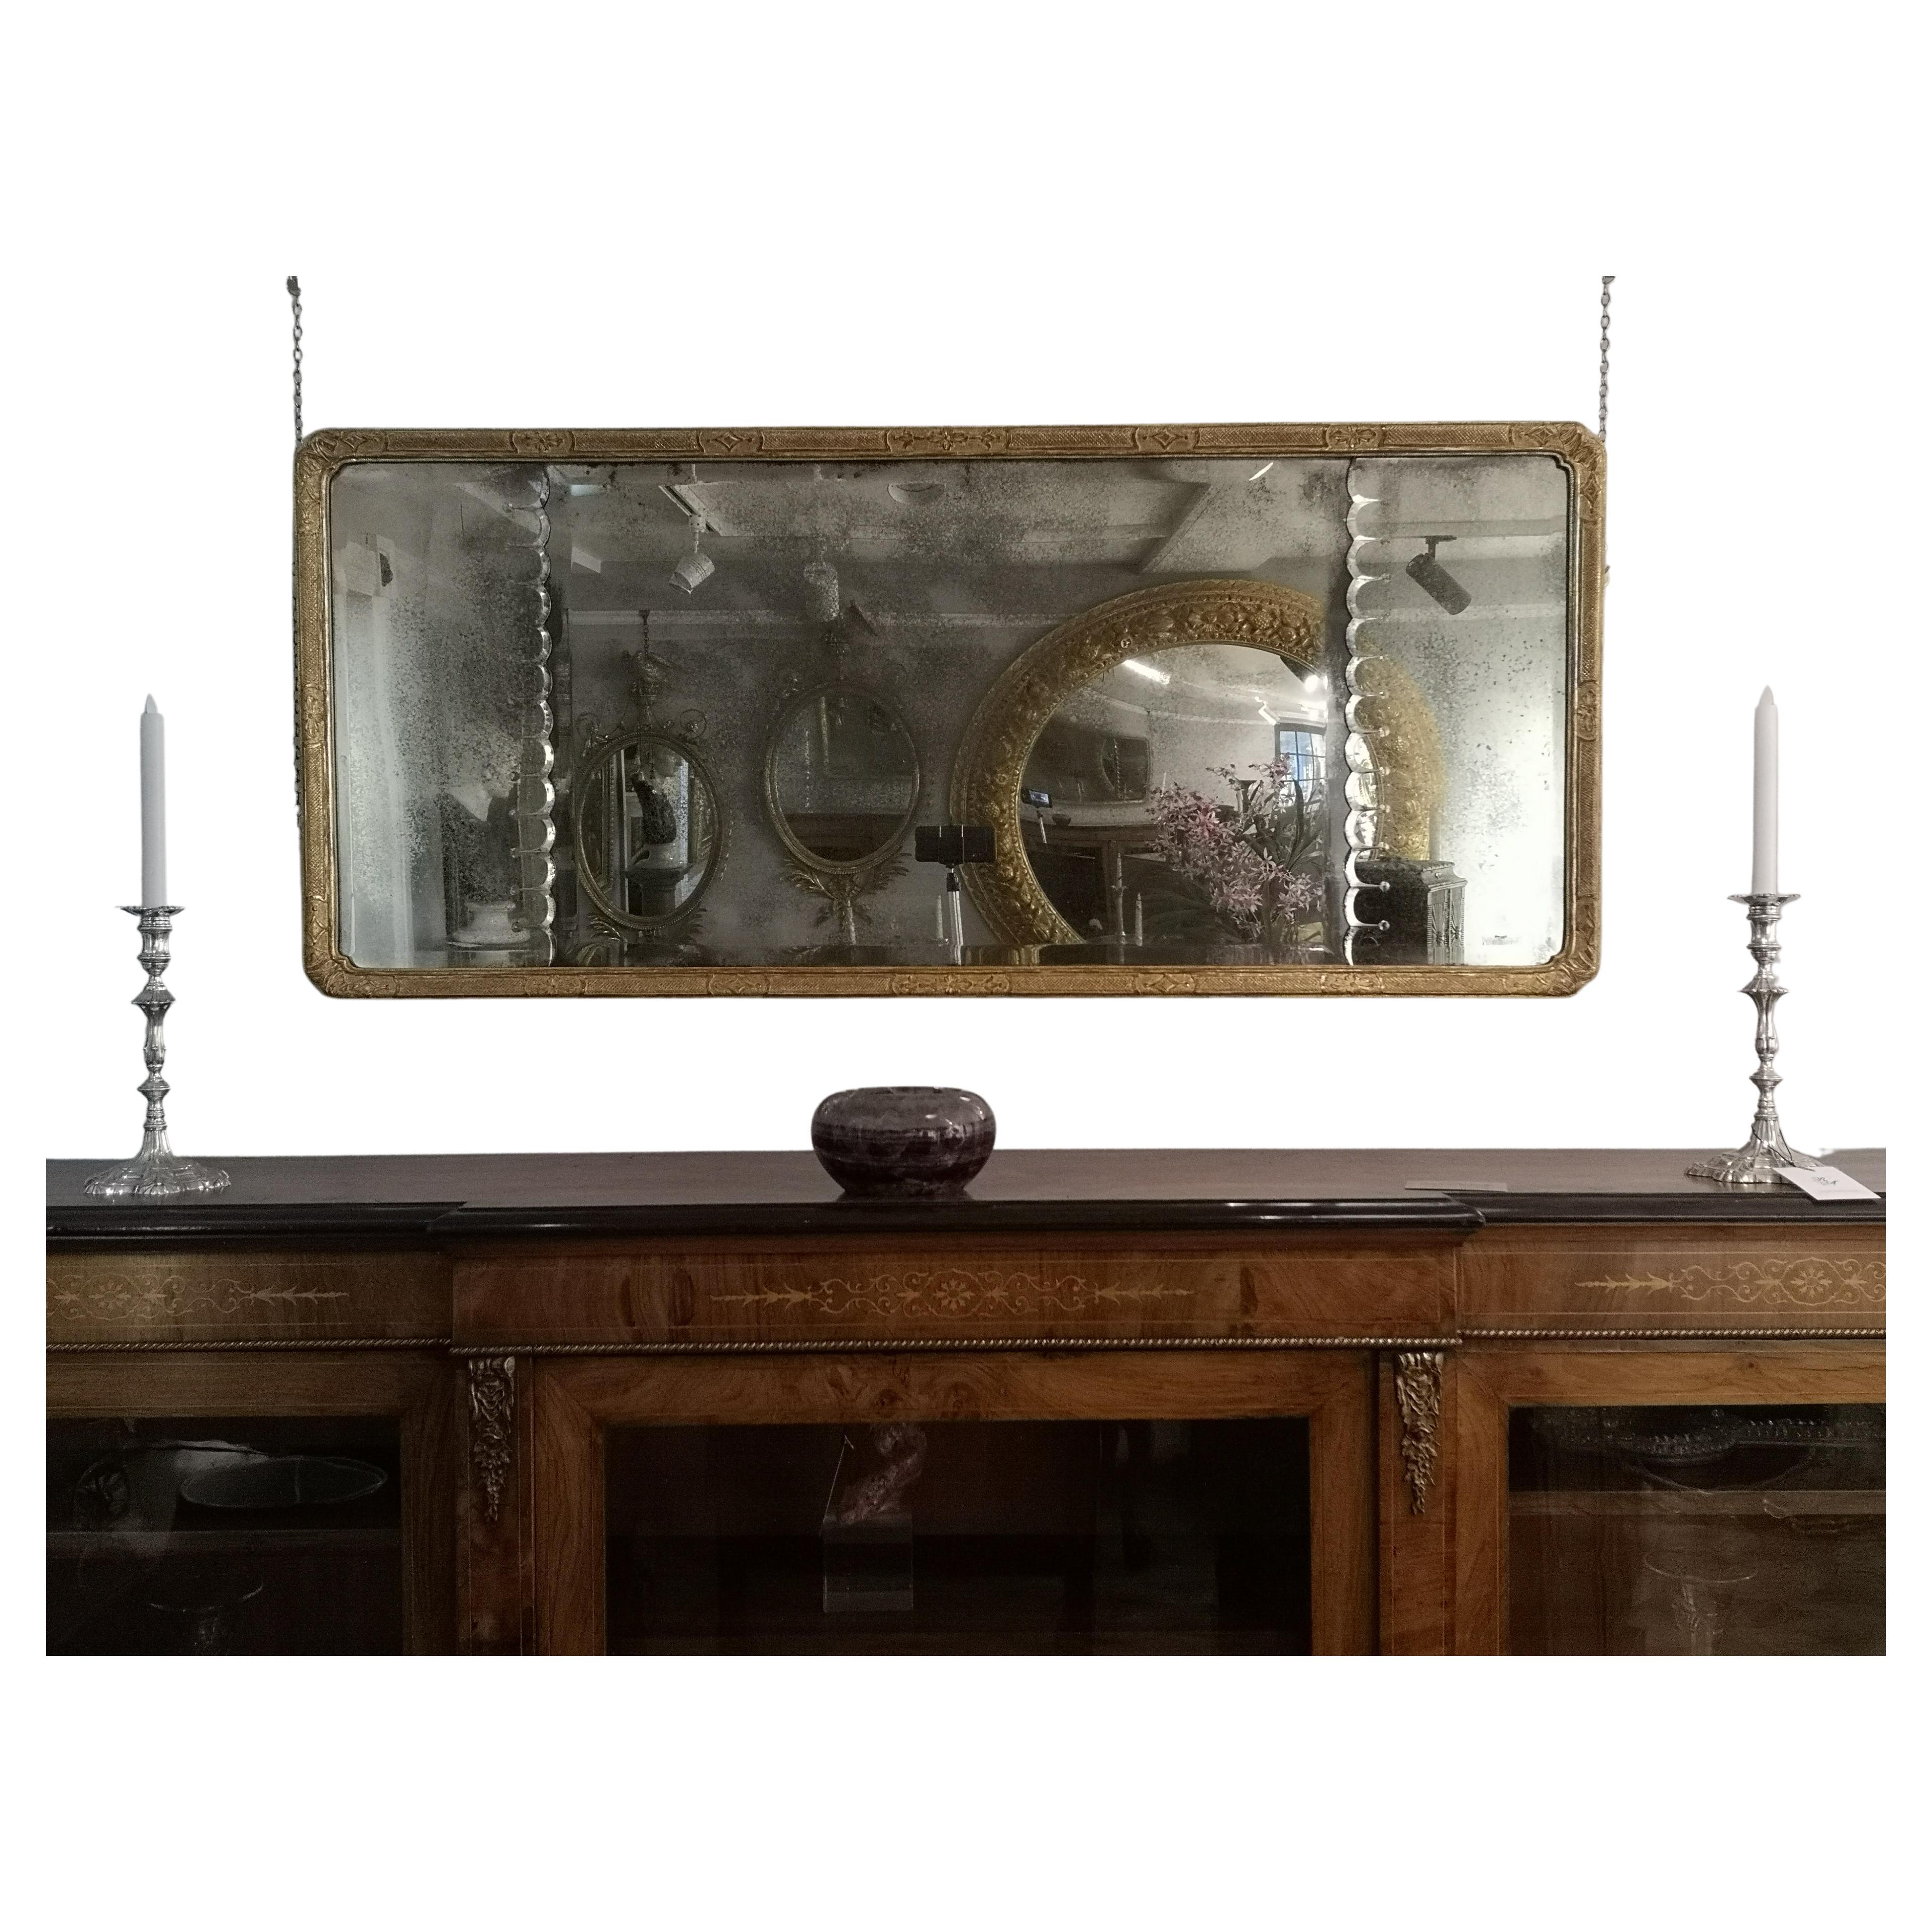 A fine triple mercury plate gilded wood and gesso overmantel mirror, the divided silvered and bevelled glass with scalloped edging to the outer sections, the rectangular frame having a running link inner with the mainframe decorated with